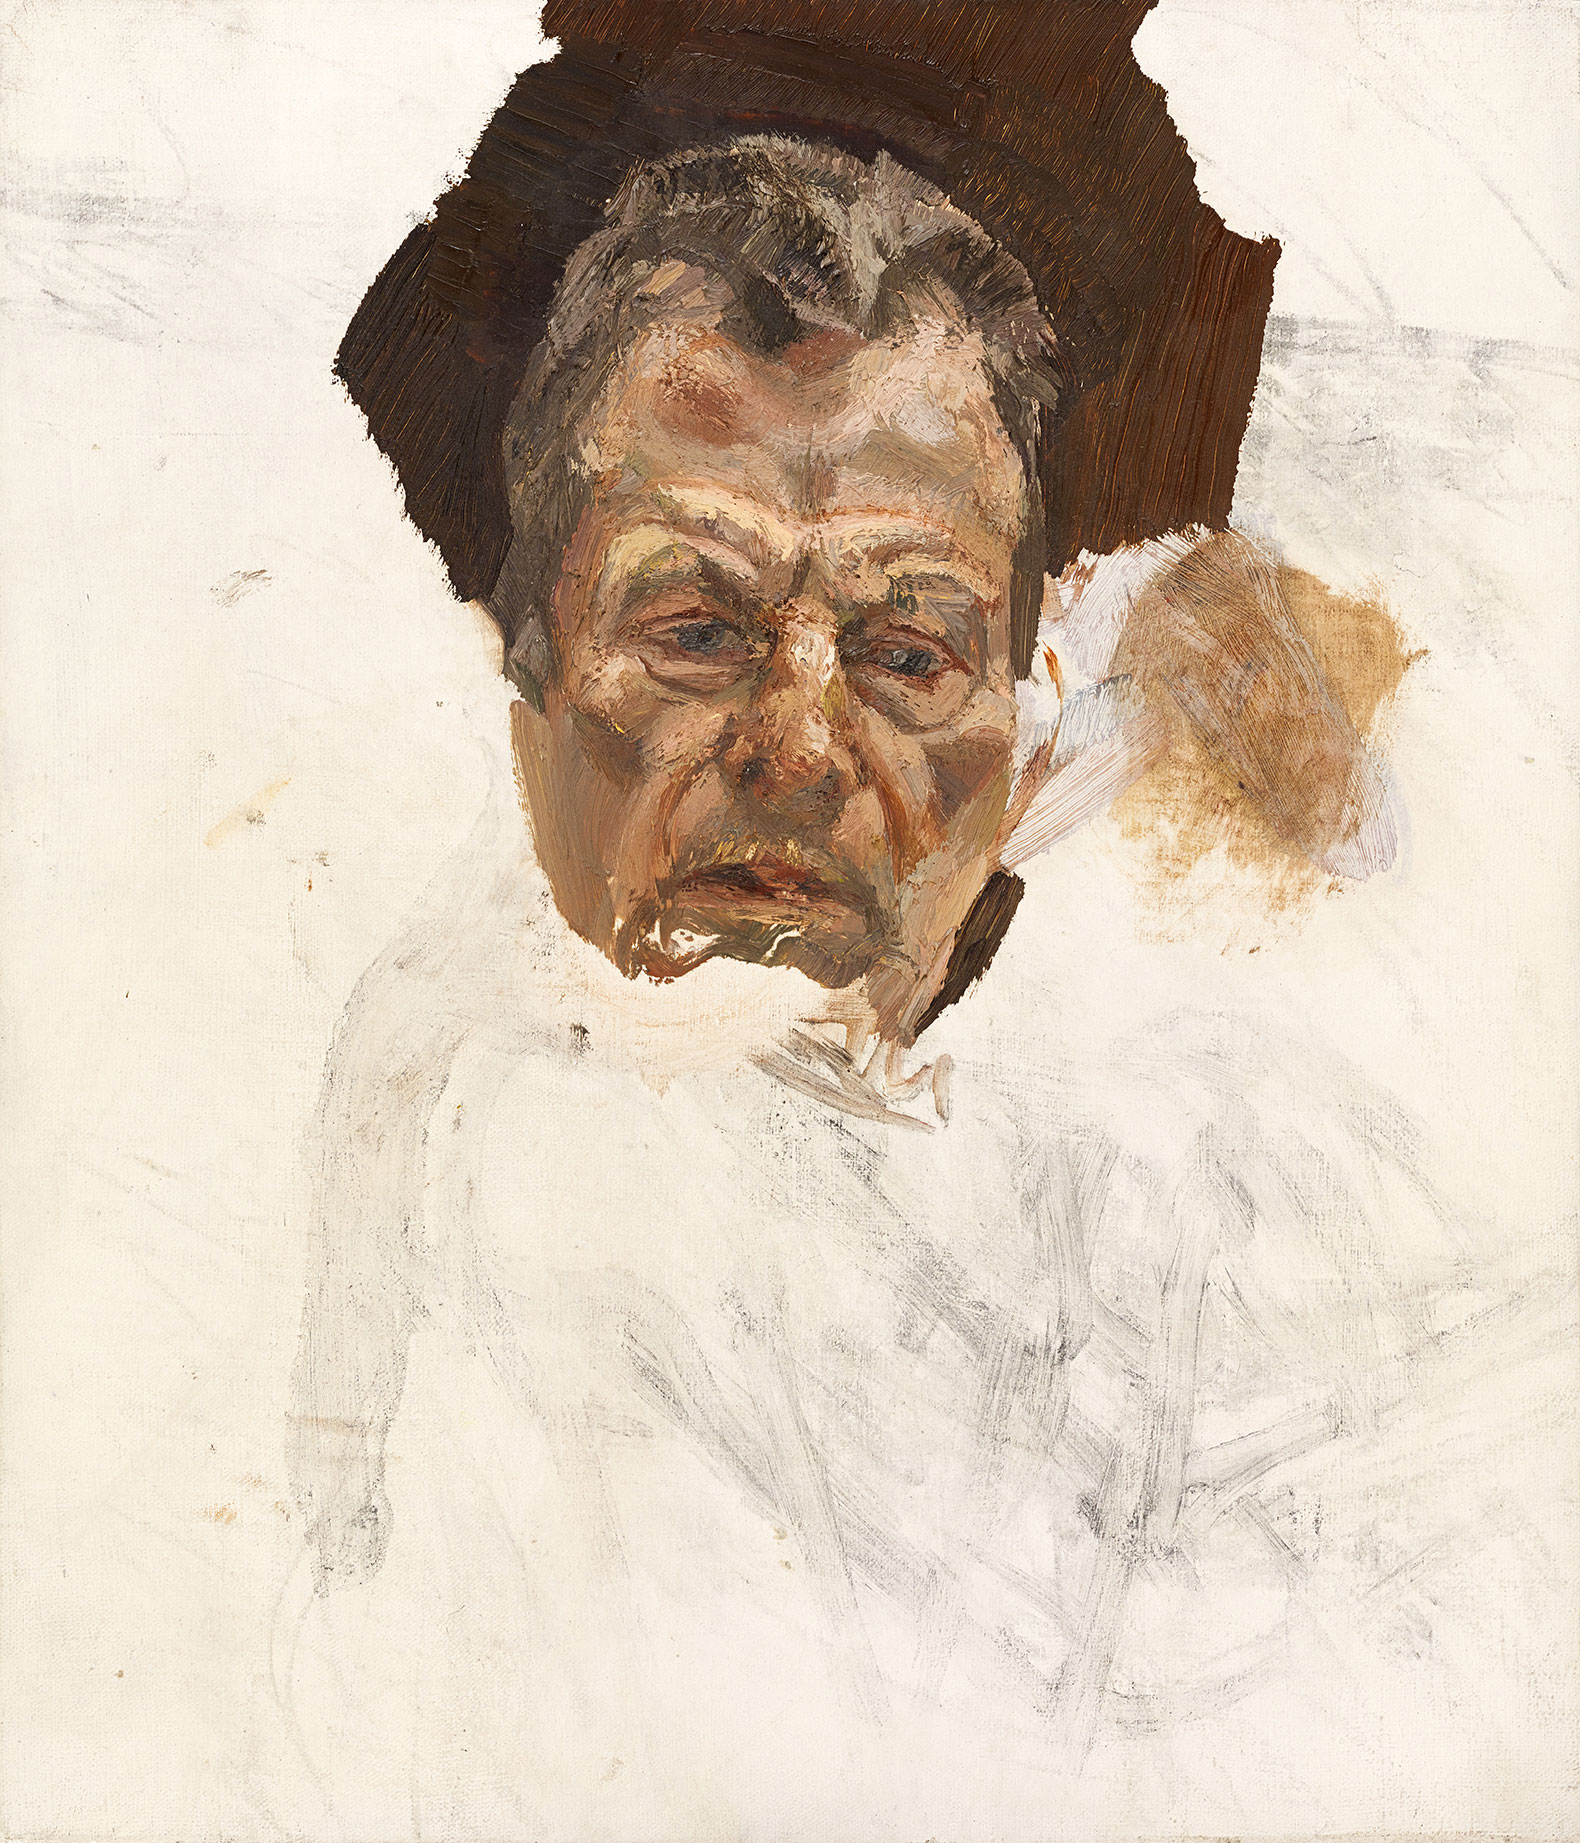 Unfinished self-portrait by Lucian Freud, circa 1980 